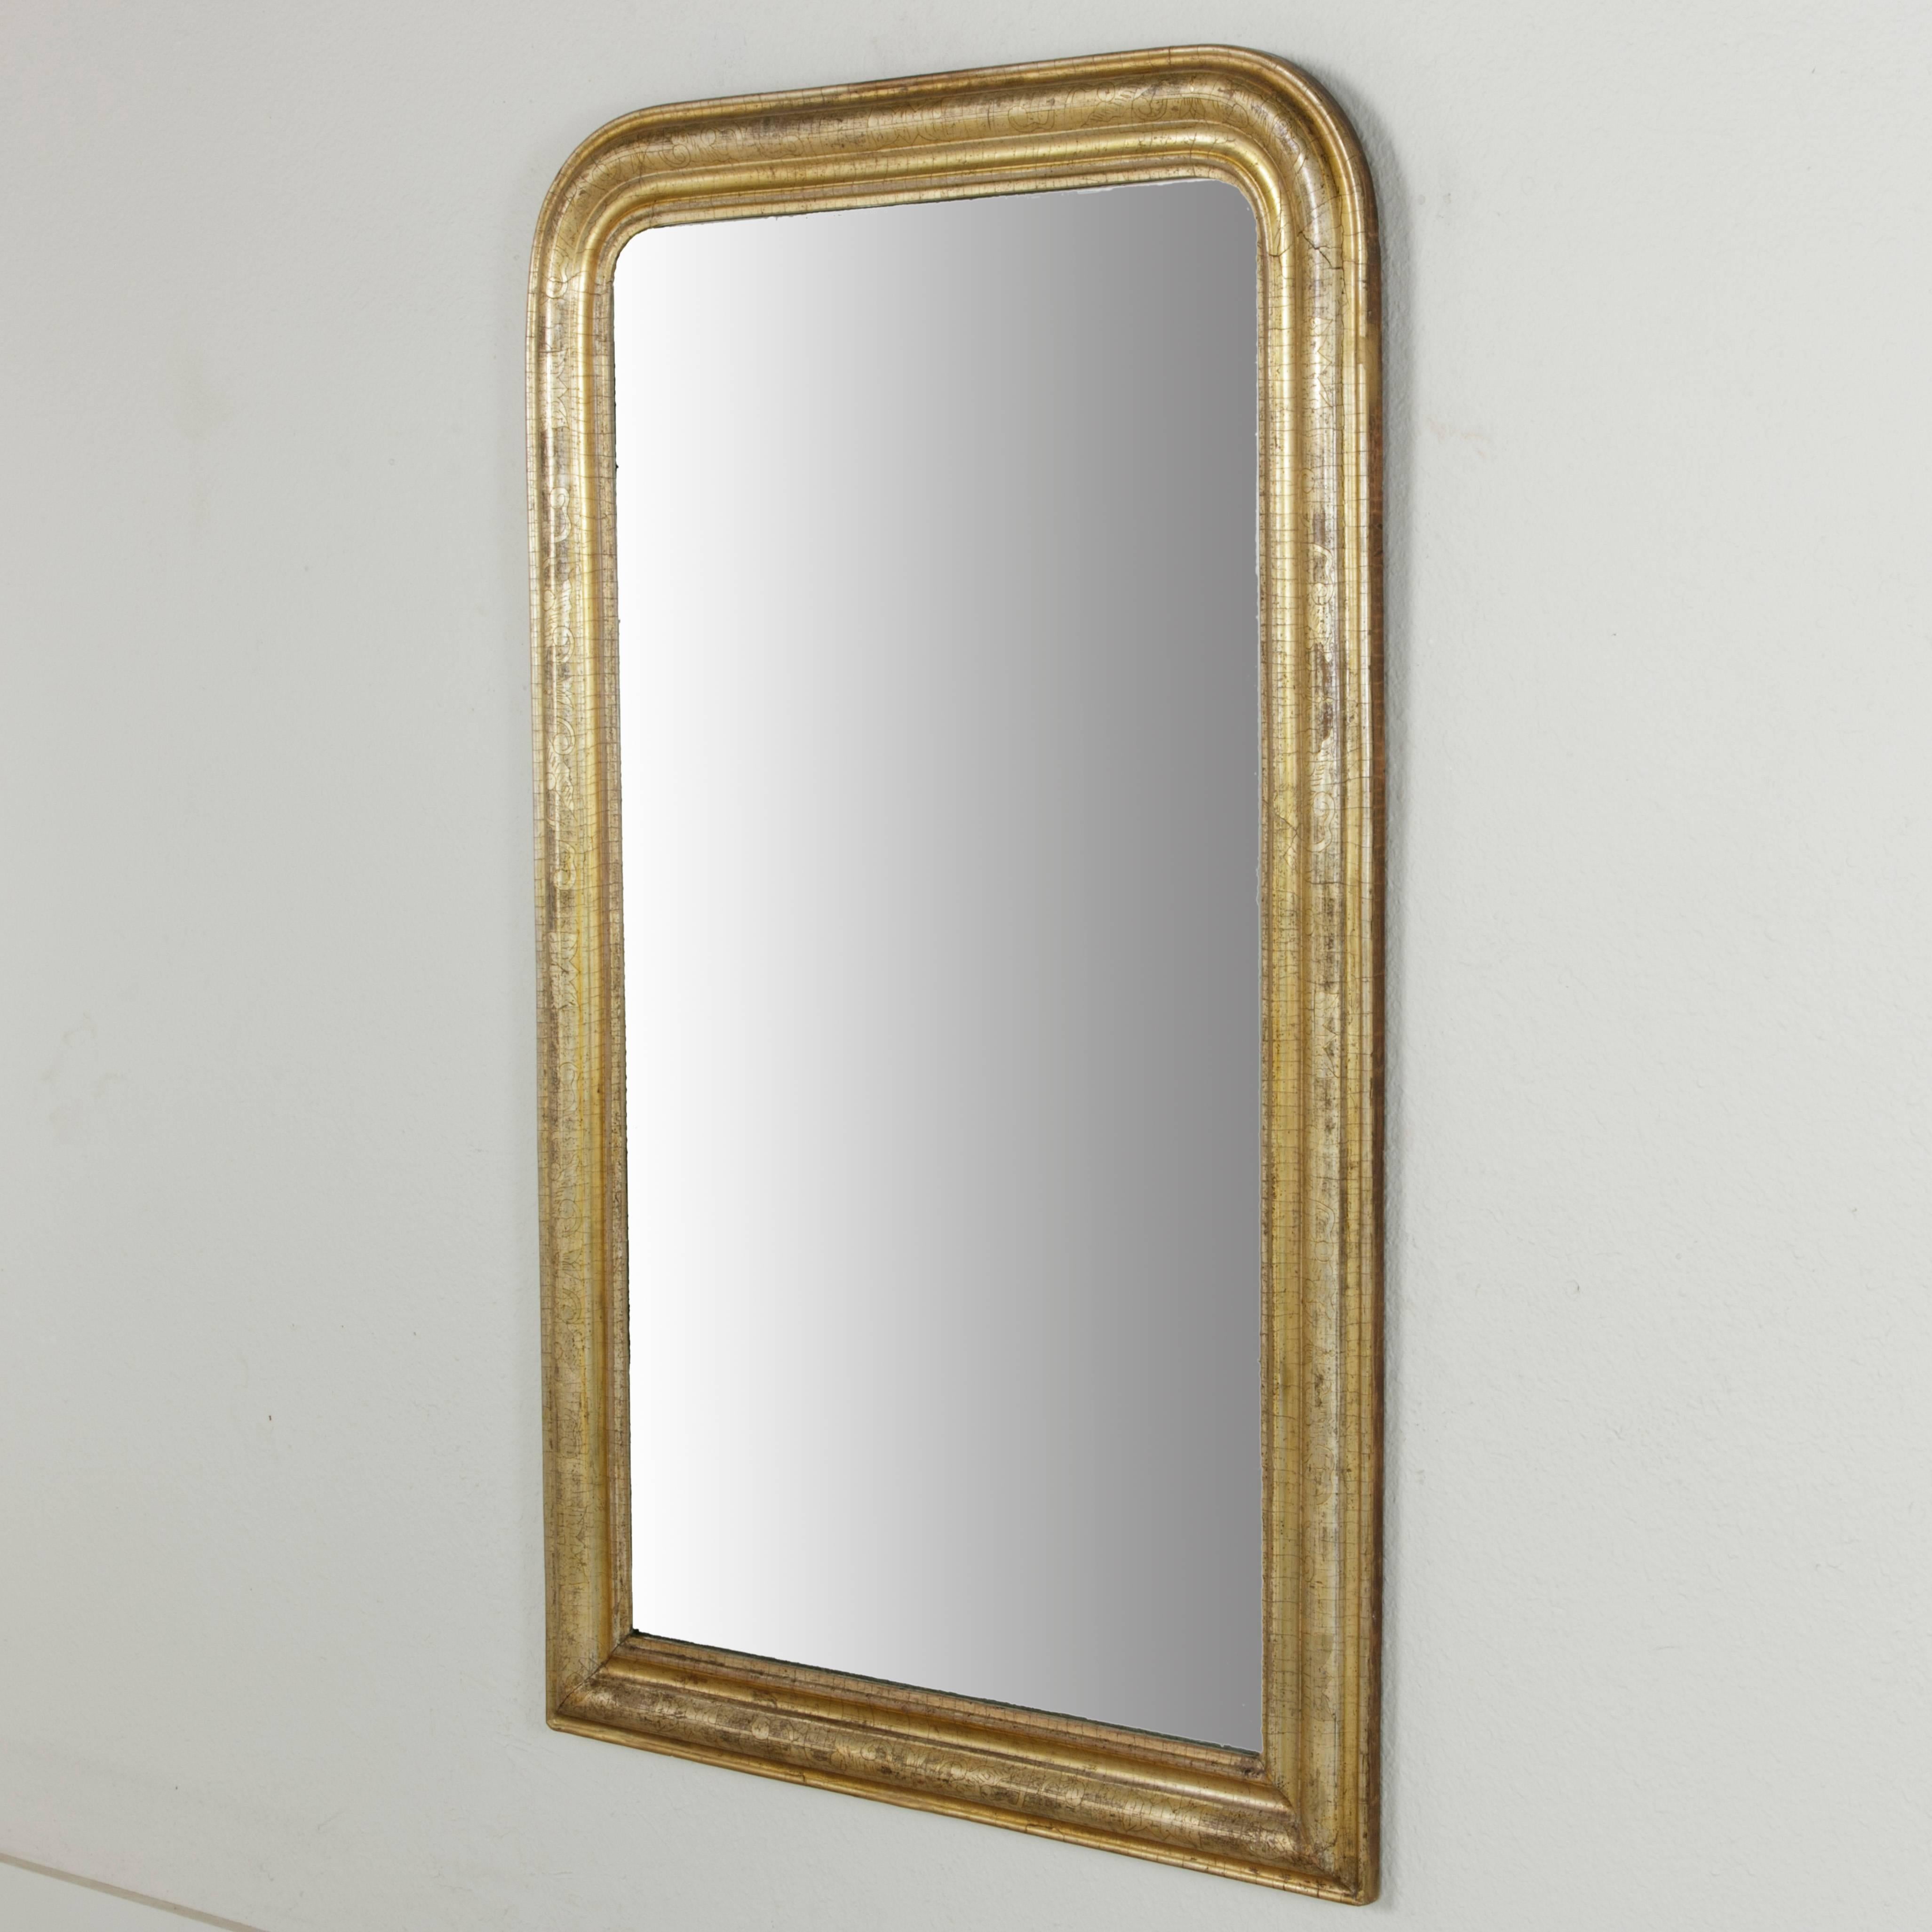 This nineteenth century French Louis Philippe period mirror is set apart from the rest by its amazing patina! Its incised gilt wood frame has aged in such a way that silver highlights appear in the gilding. With dimensions of 54 inches in height and